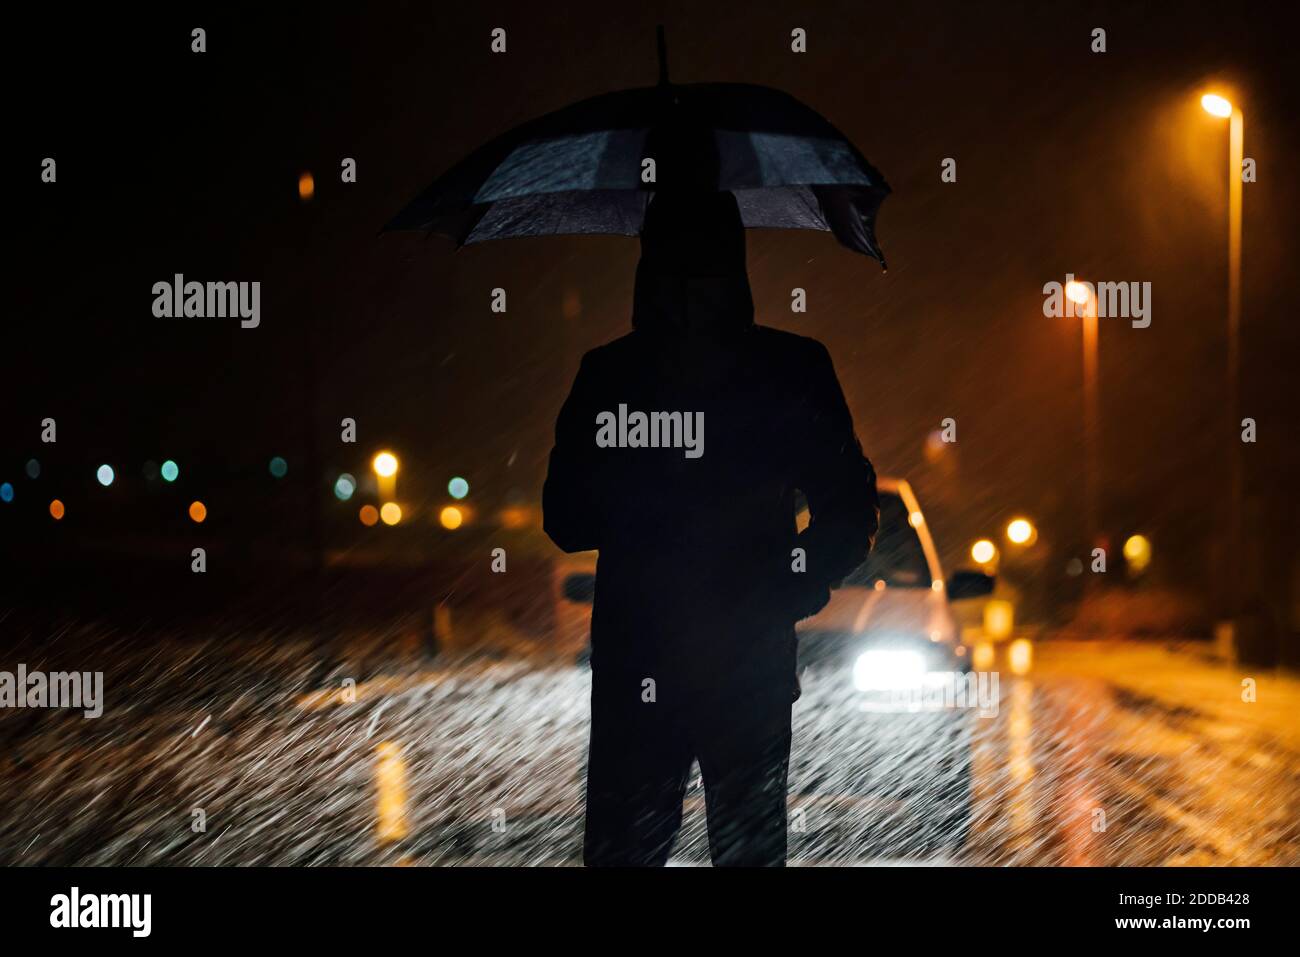 Young man with umbrella standing in front of car dutimng a rainy night Stock Photo